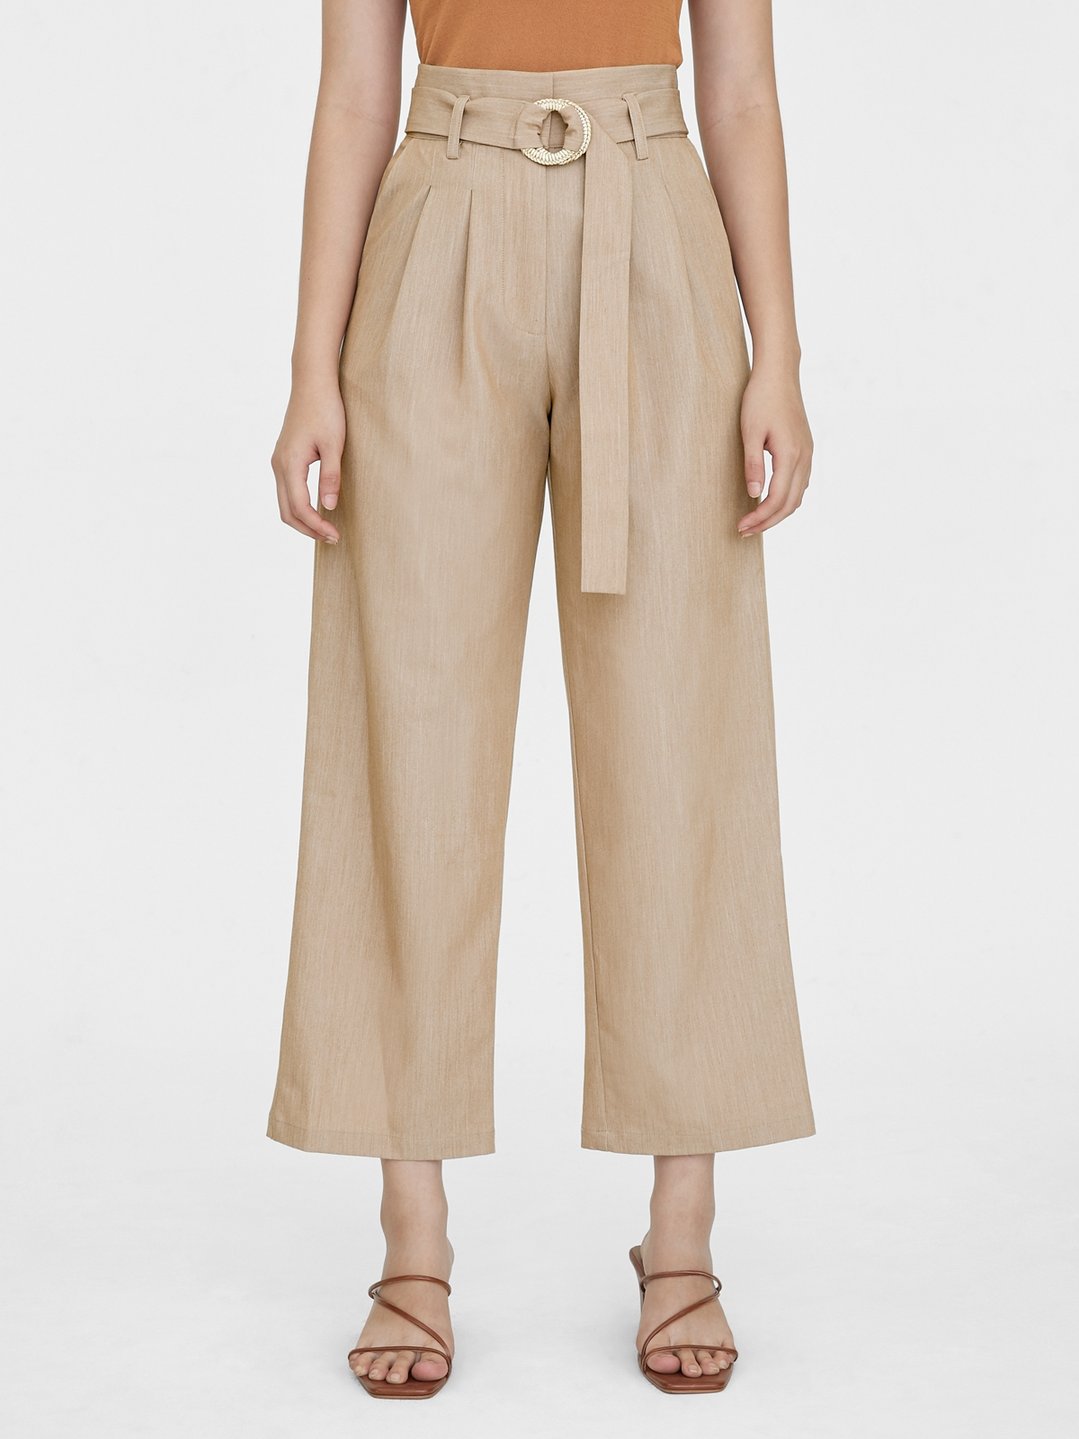 High Waist Woven Belted Pants - Brown - Pomelo Fashion